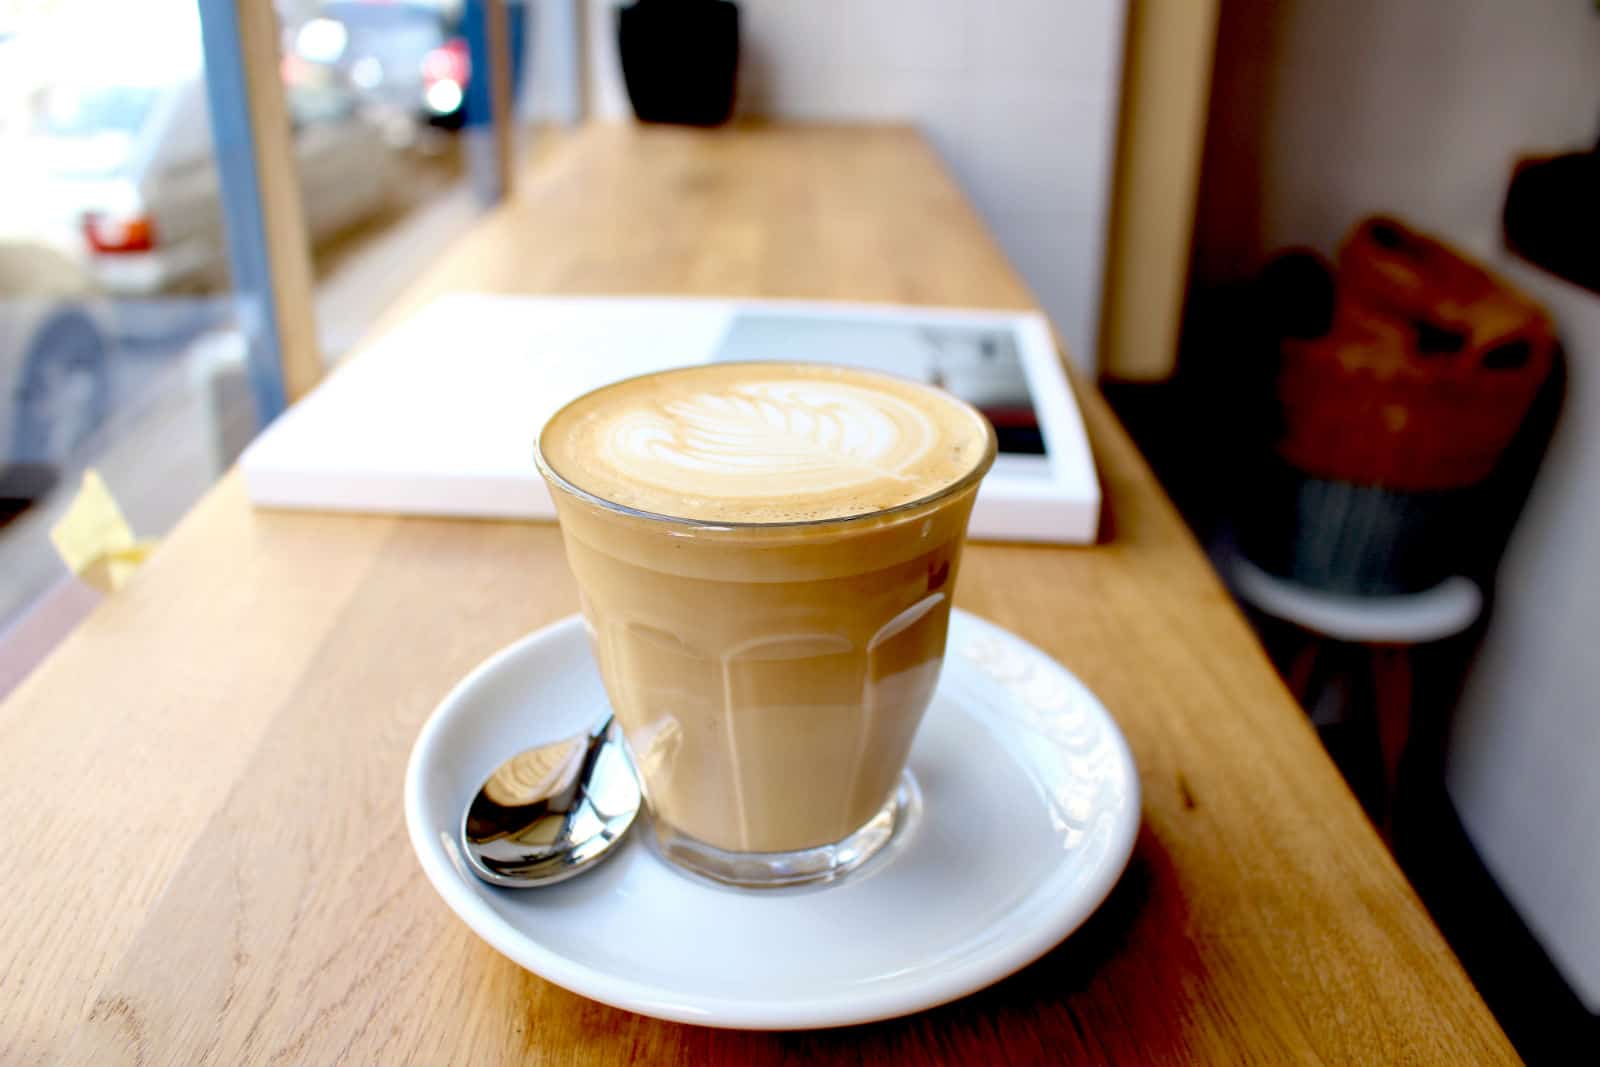 The Paris Craft Coffee Revolution Continues with Coffee Spoune and Café Oberkampf